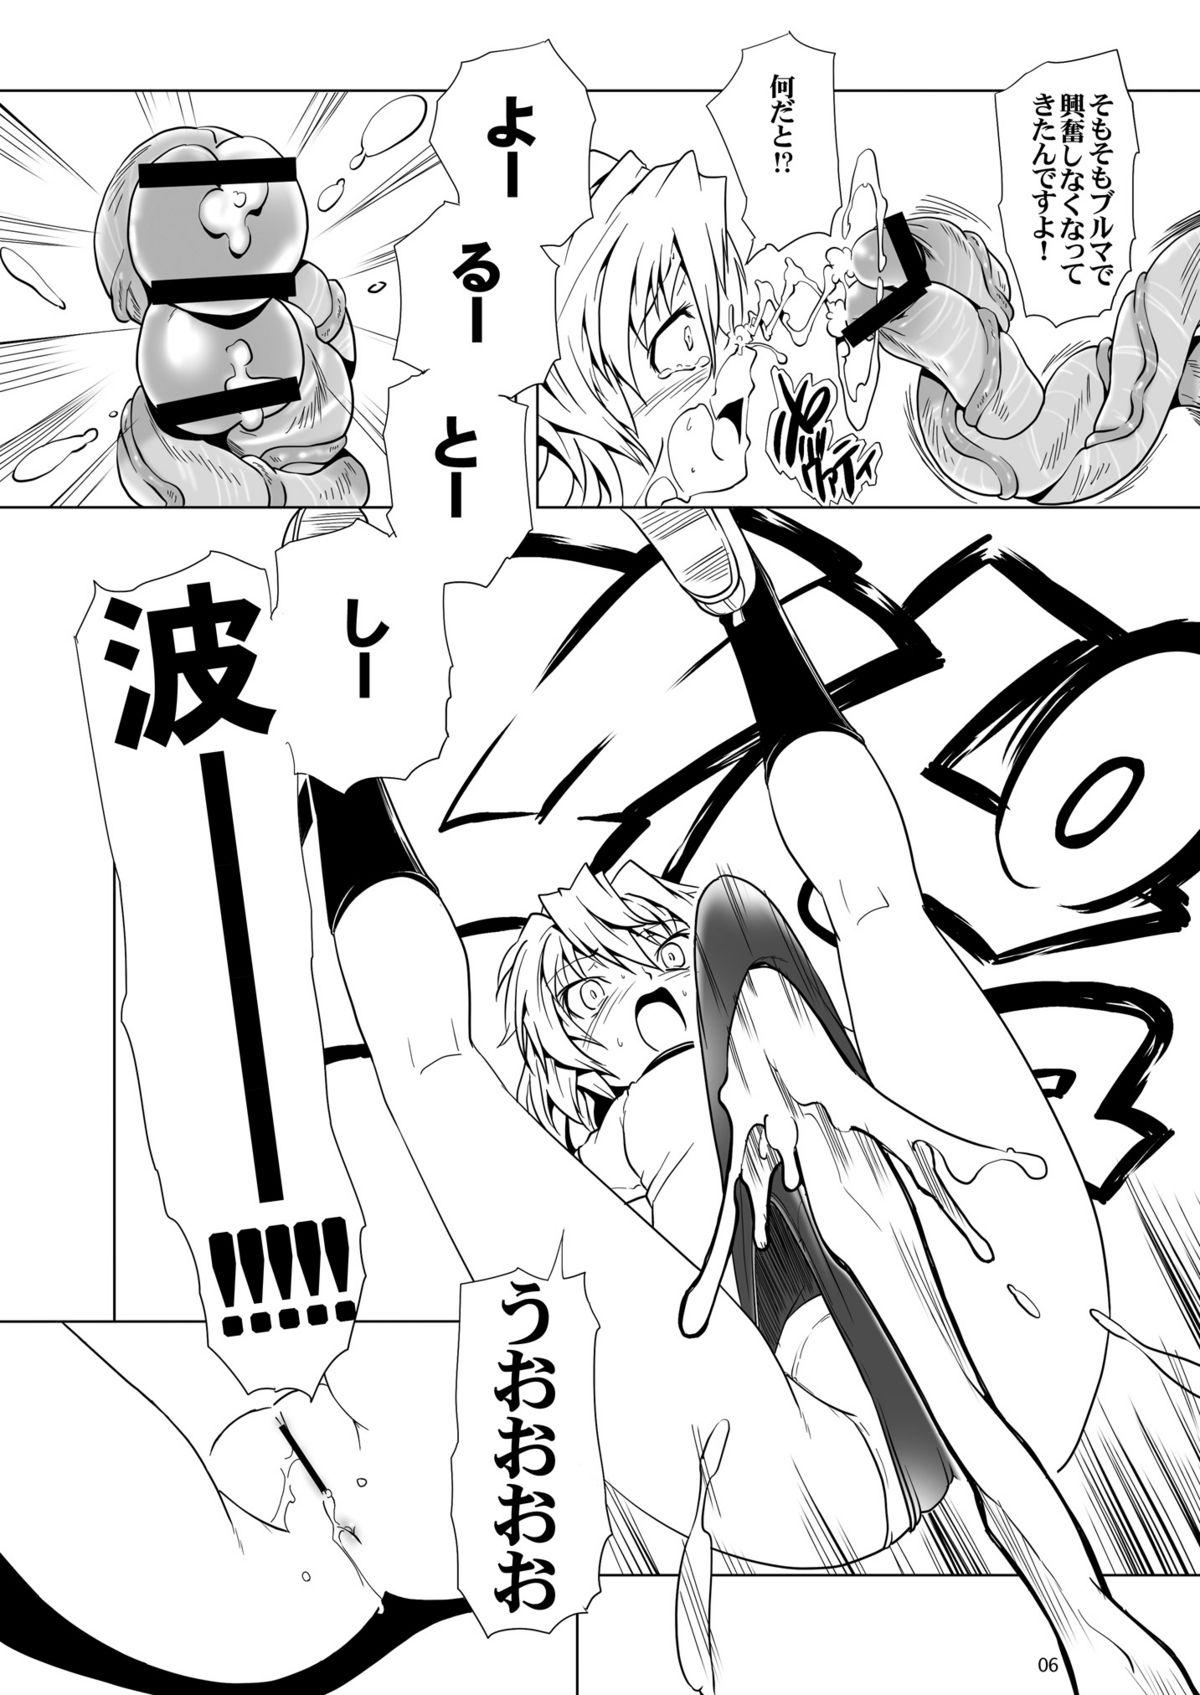 Girls Getting Fucked 魔理沙のブルマでとろろ芋をすりおろす - Touhou project Cosplay - Page 6